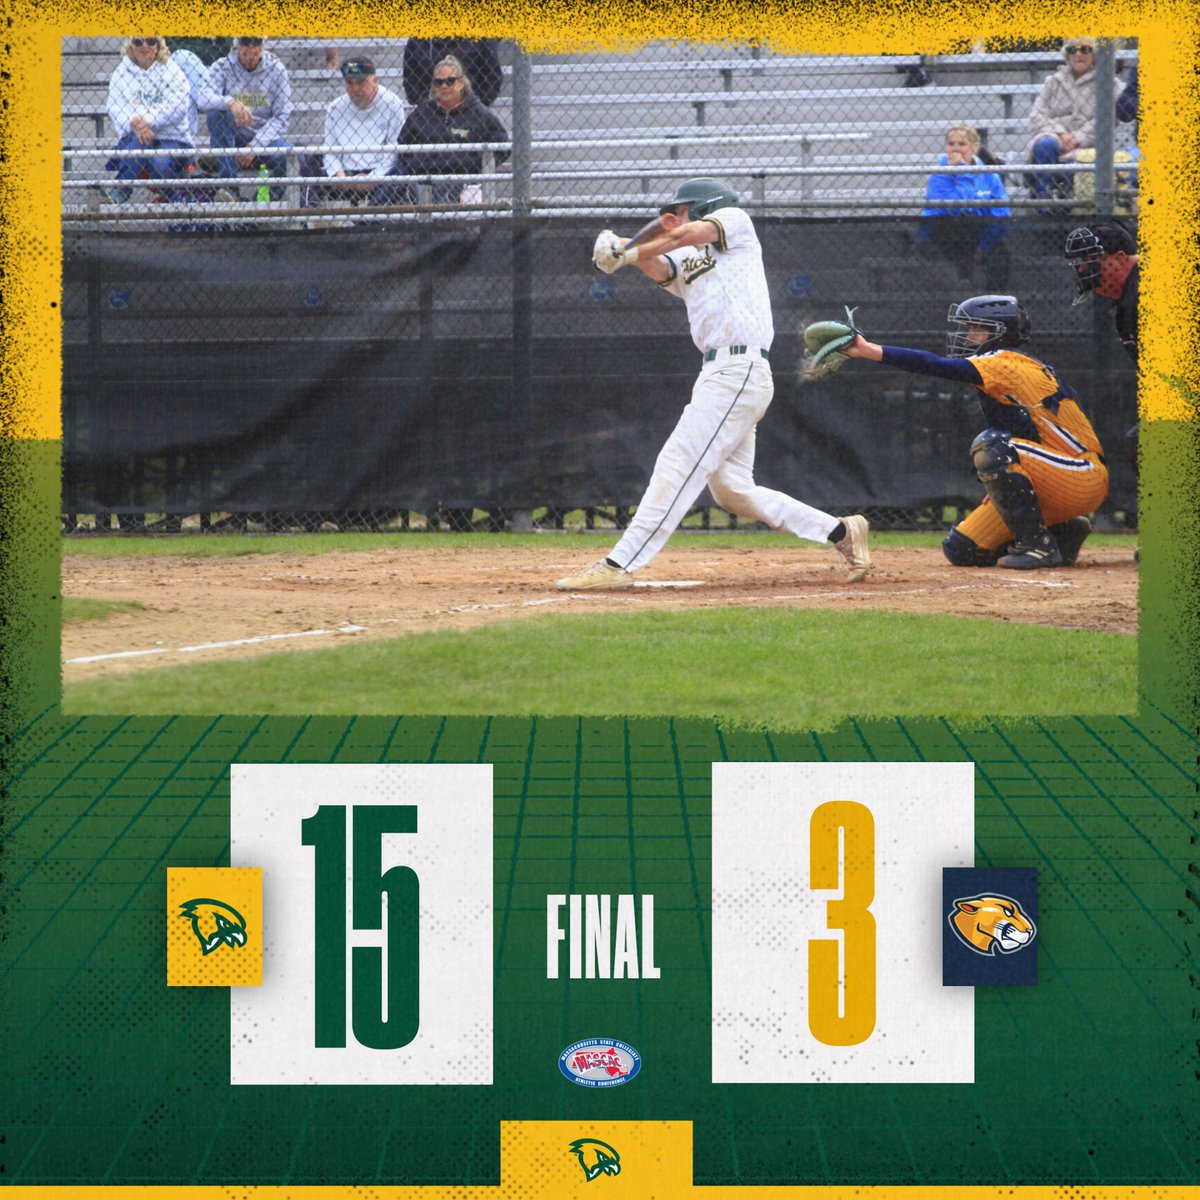 ⚾️Final Score ⚾️
The @FSUFalconsBSB team collected a 15-3 triumph over the Trailblazers of MCLA this afternoon in @mascacsports action from Riccards Field.
#FearTheFlock #TheFalconsWay